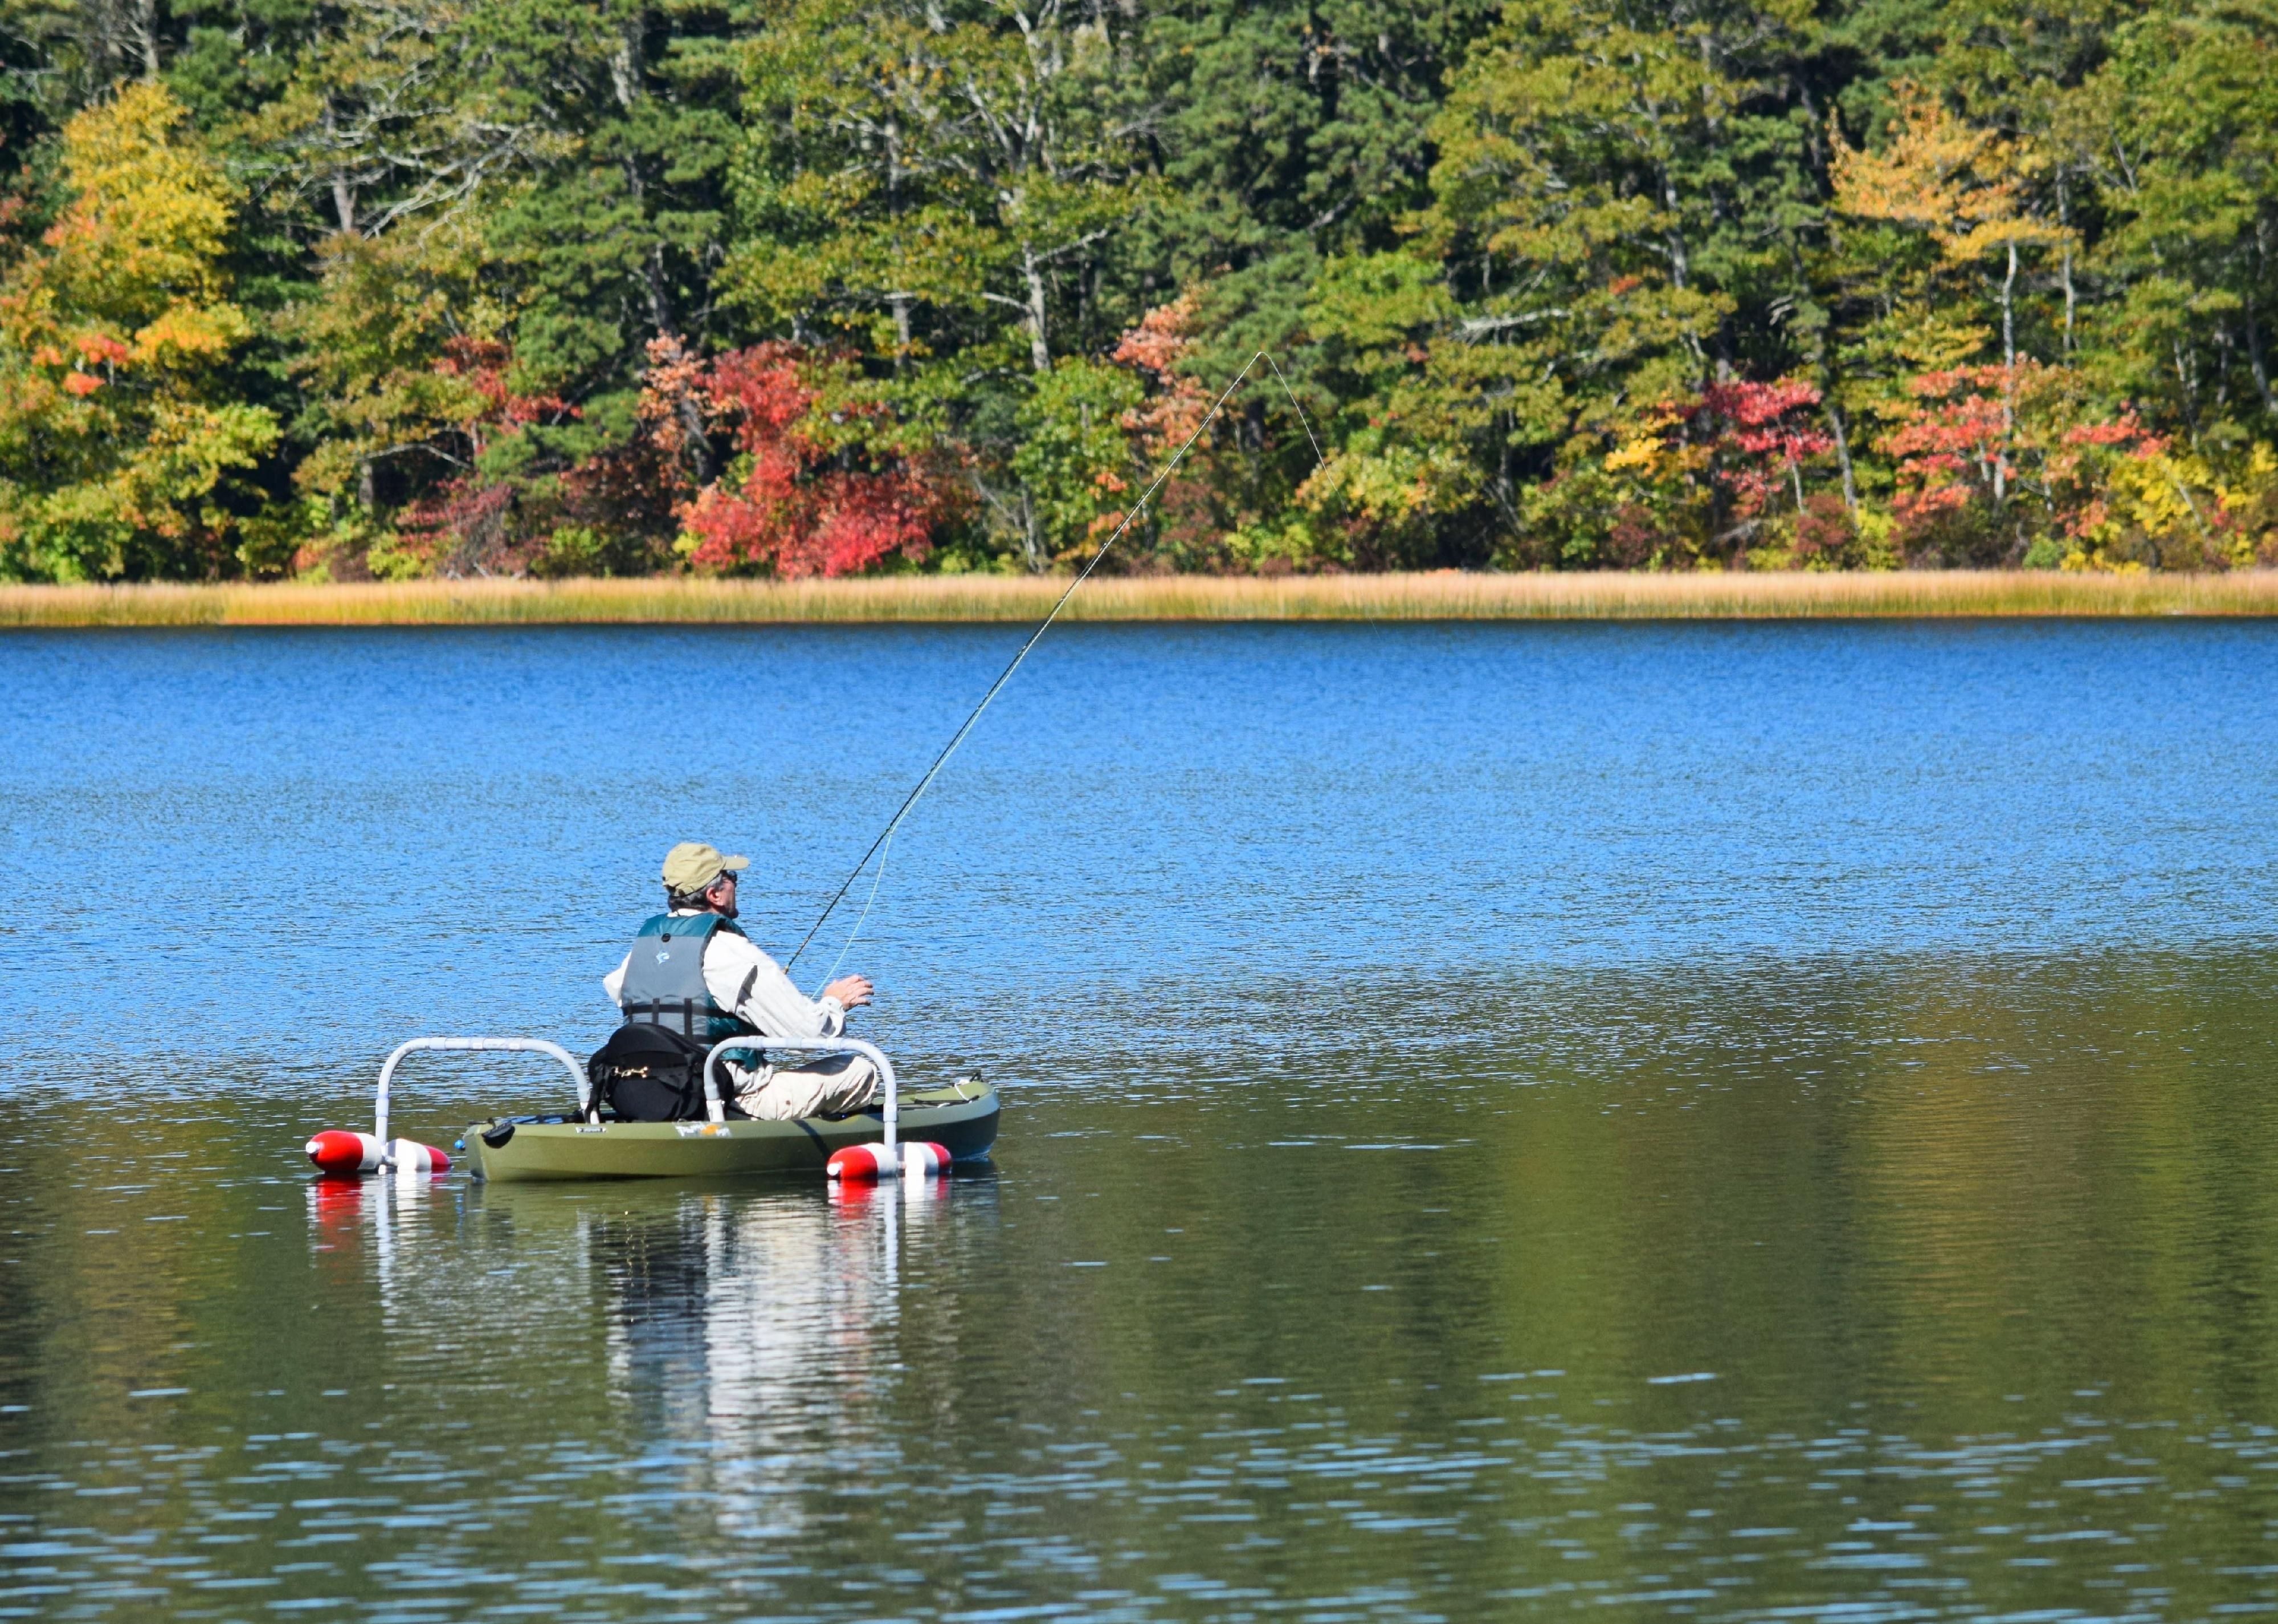 Person fishing on small boat on lake.